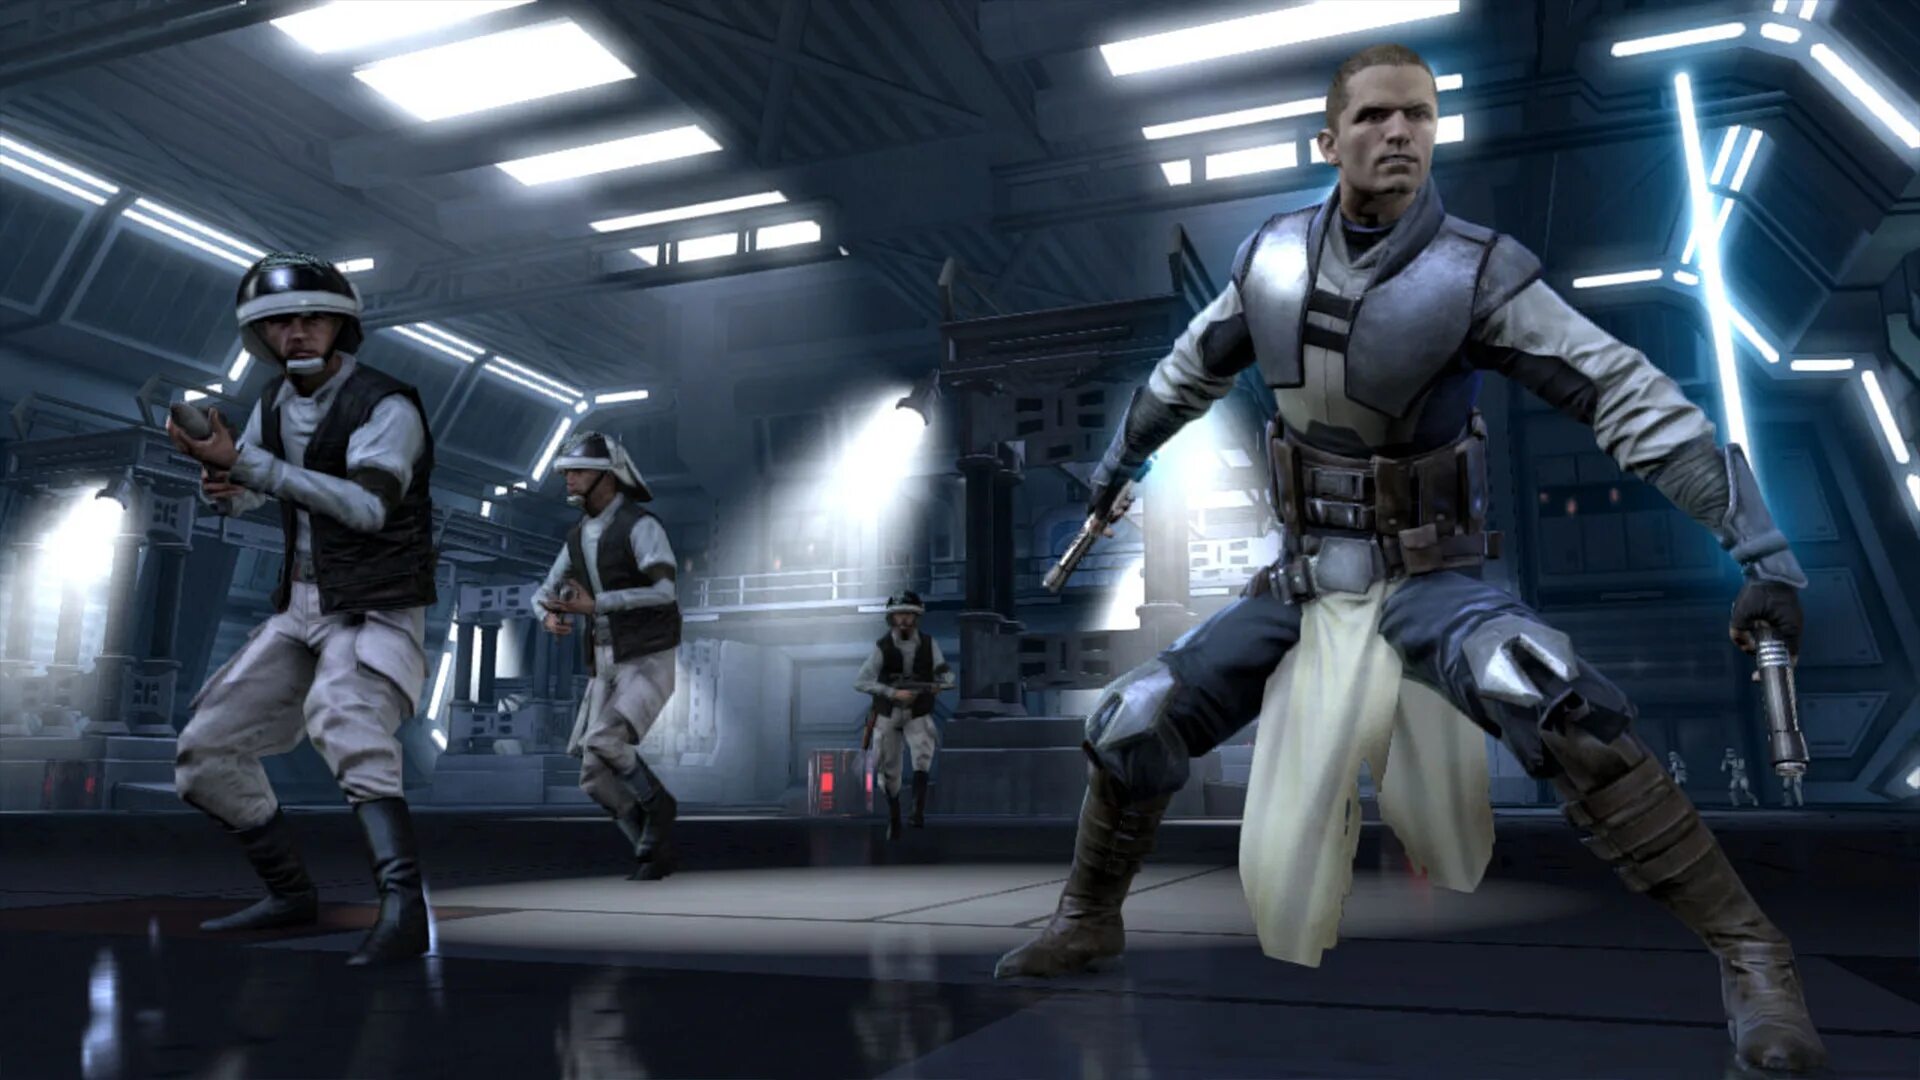 Star Wars Starkiller игра. Star Wars unleashed 2. Стар ВАРС the Force unleashed 2. Star Wars: the Force unleashed. Игра star